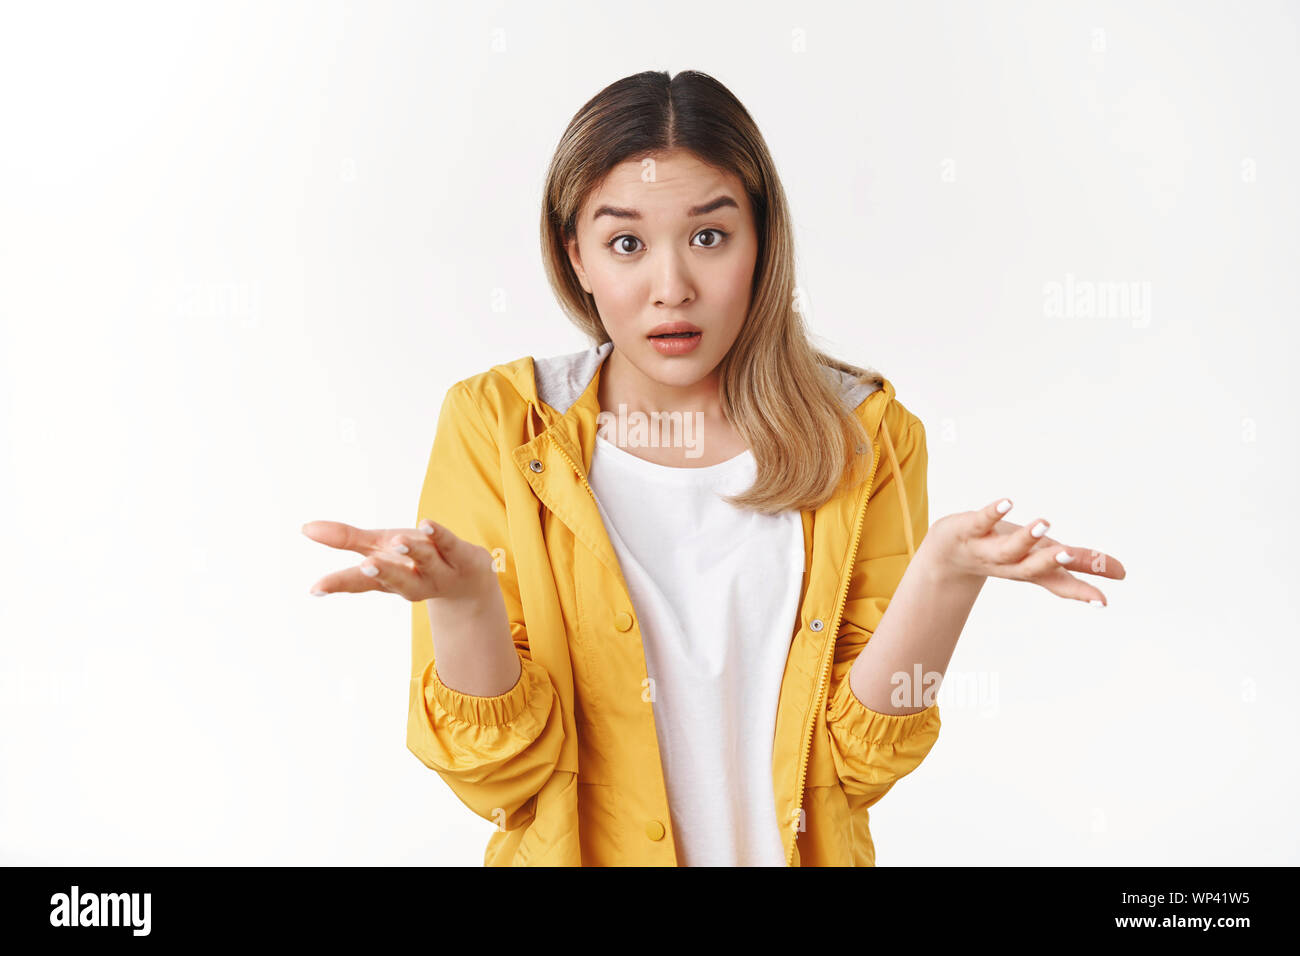 What wrong. Ambushed shocked confused young asian girl coworker shrugging hands spread sideways full disbelief asking question questioned perplexed un Stock Photo